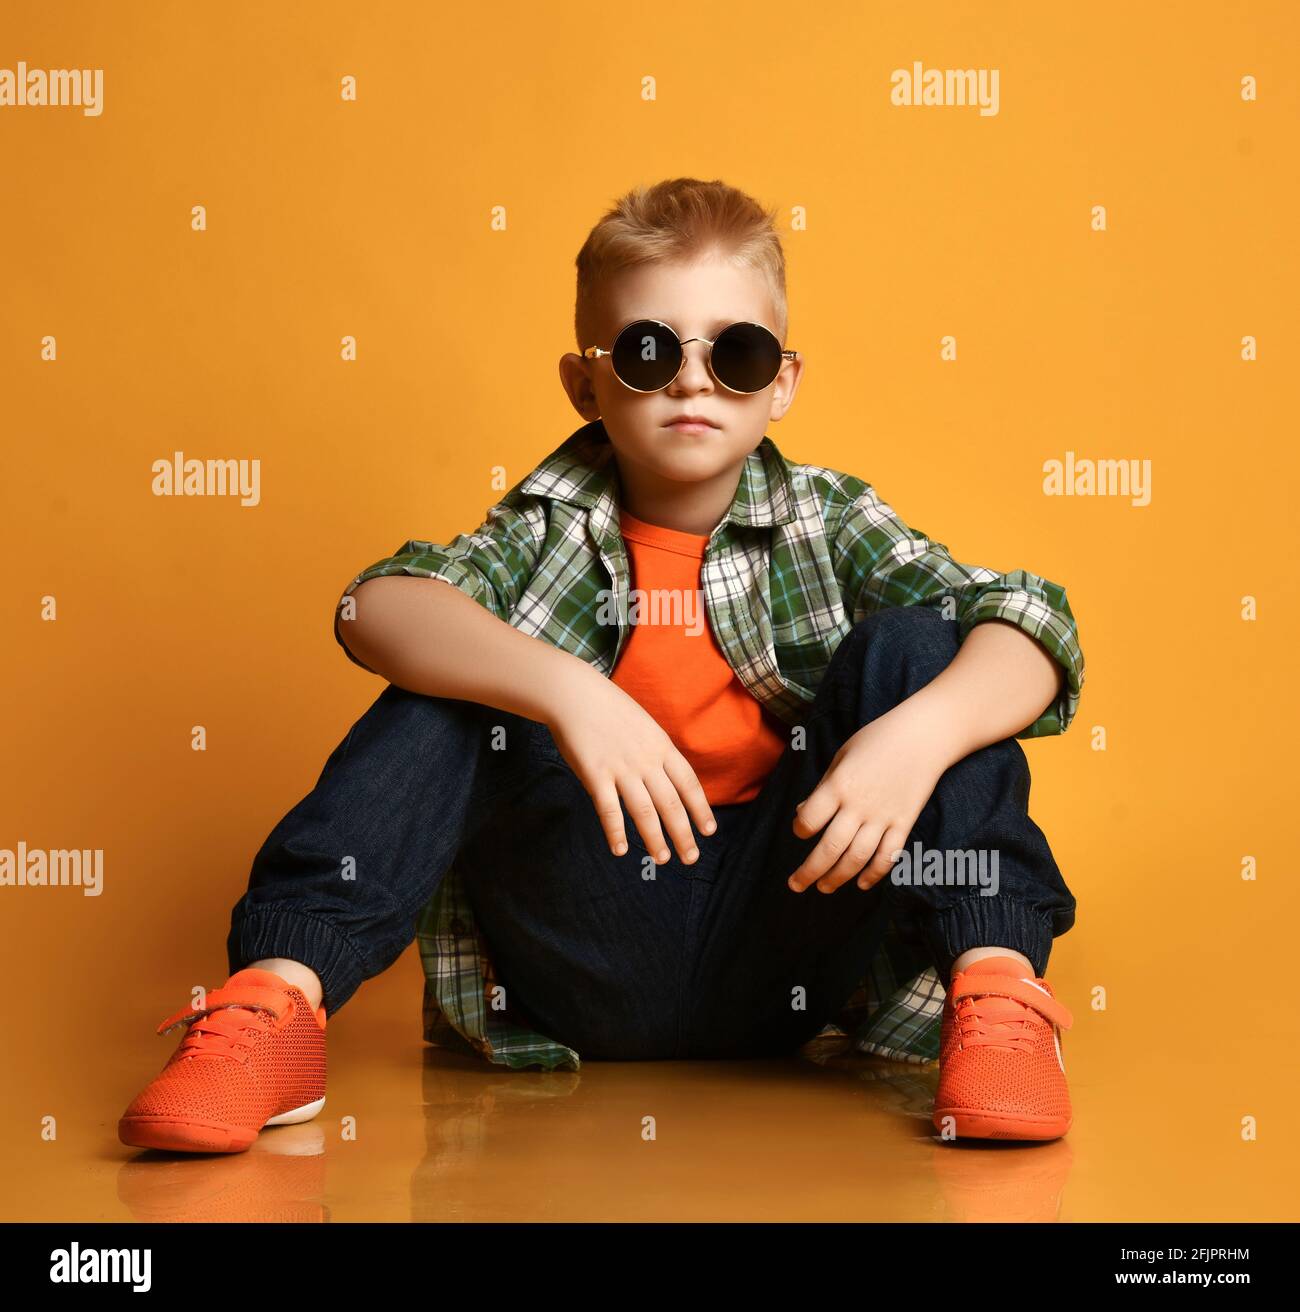 Young rock star, schoolboy teenager leader in round sunglasses, checkered shirt, orange t-shirt and jeans sits on floor Stock Photo